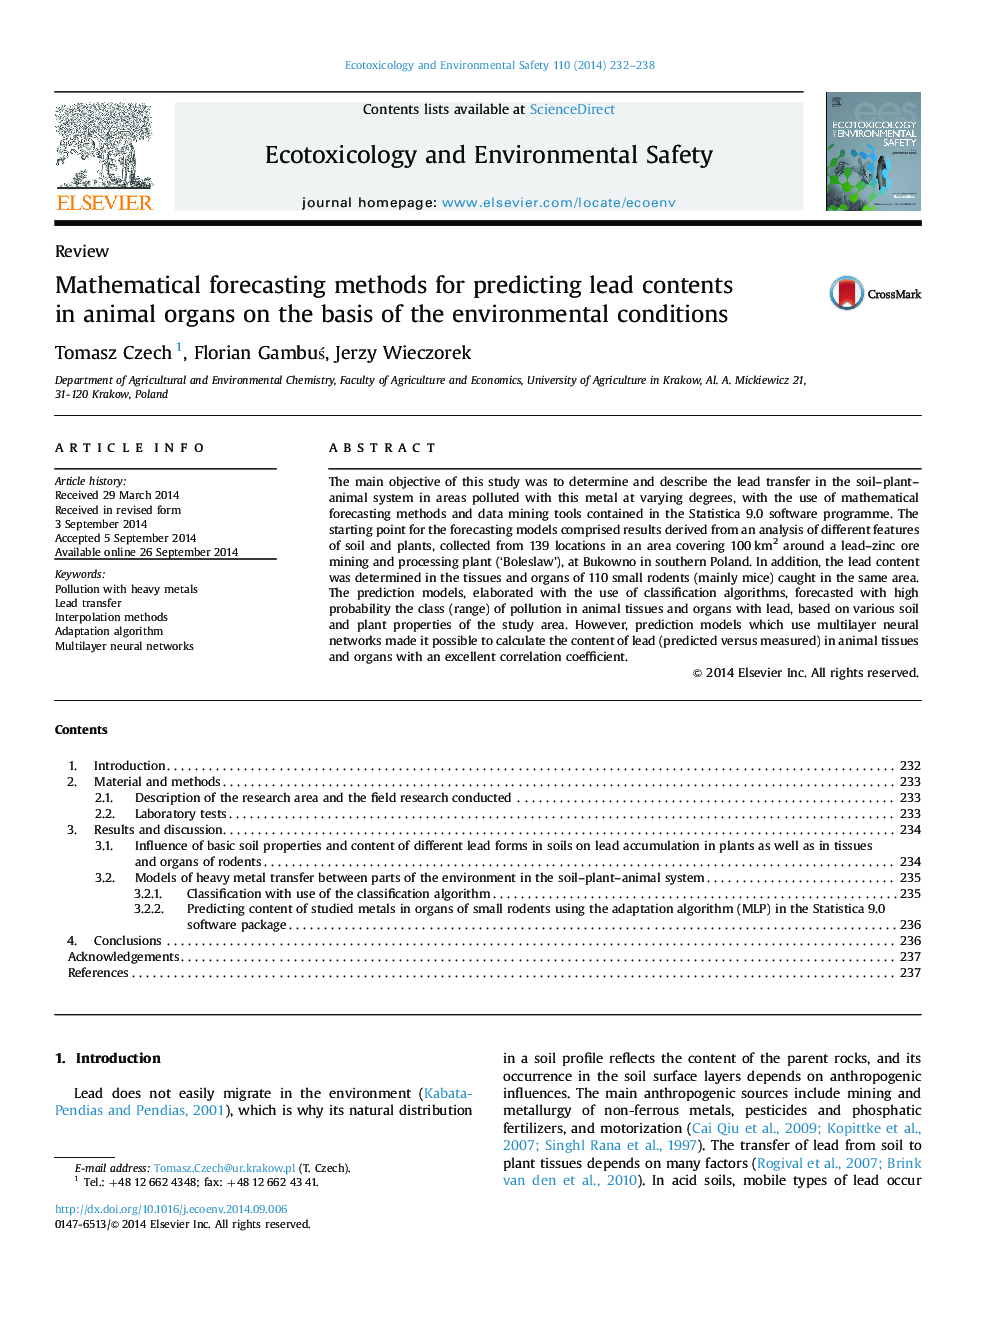 Mathematical forecasting methods for predicting lead contents in animal organs on the basis of the environmental conditions